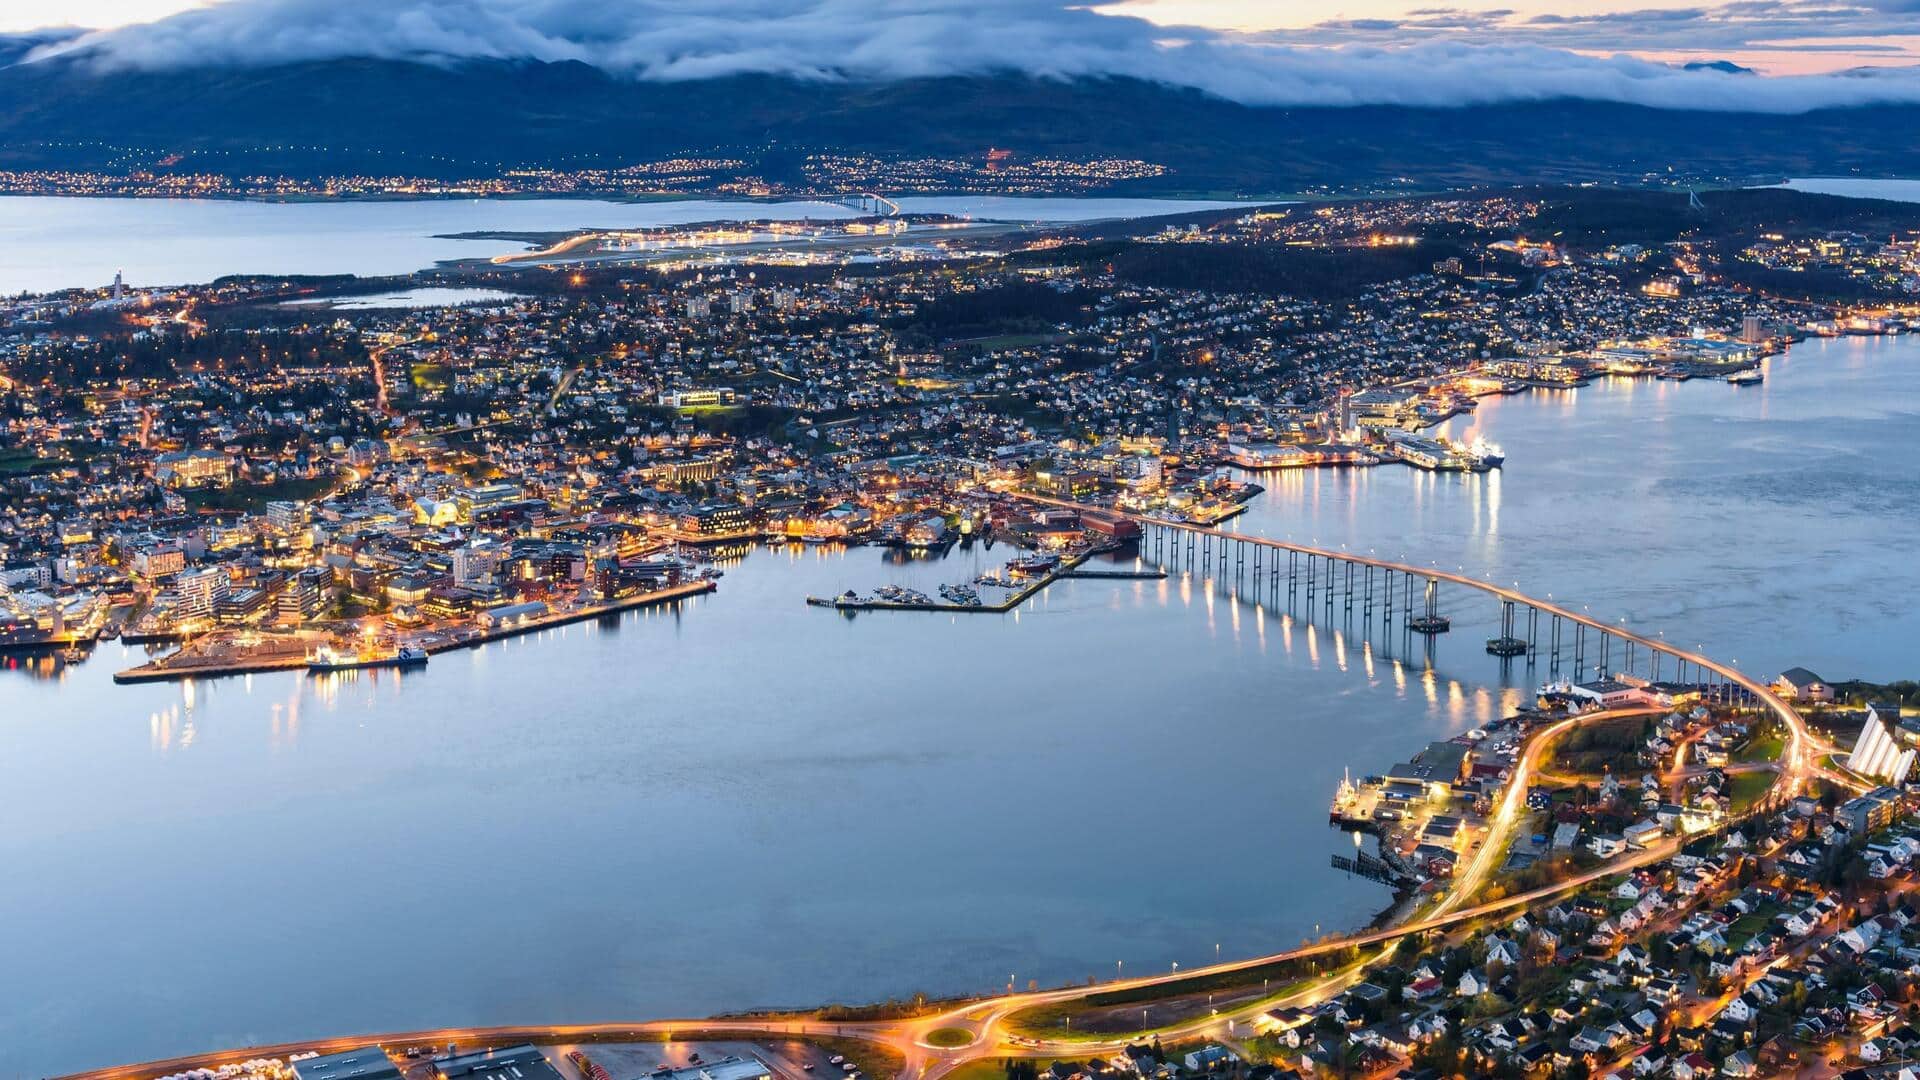 Visiting Tromso in Norway? Refer to this travel guide